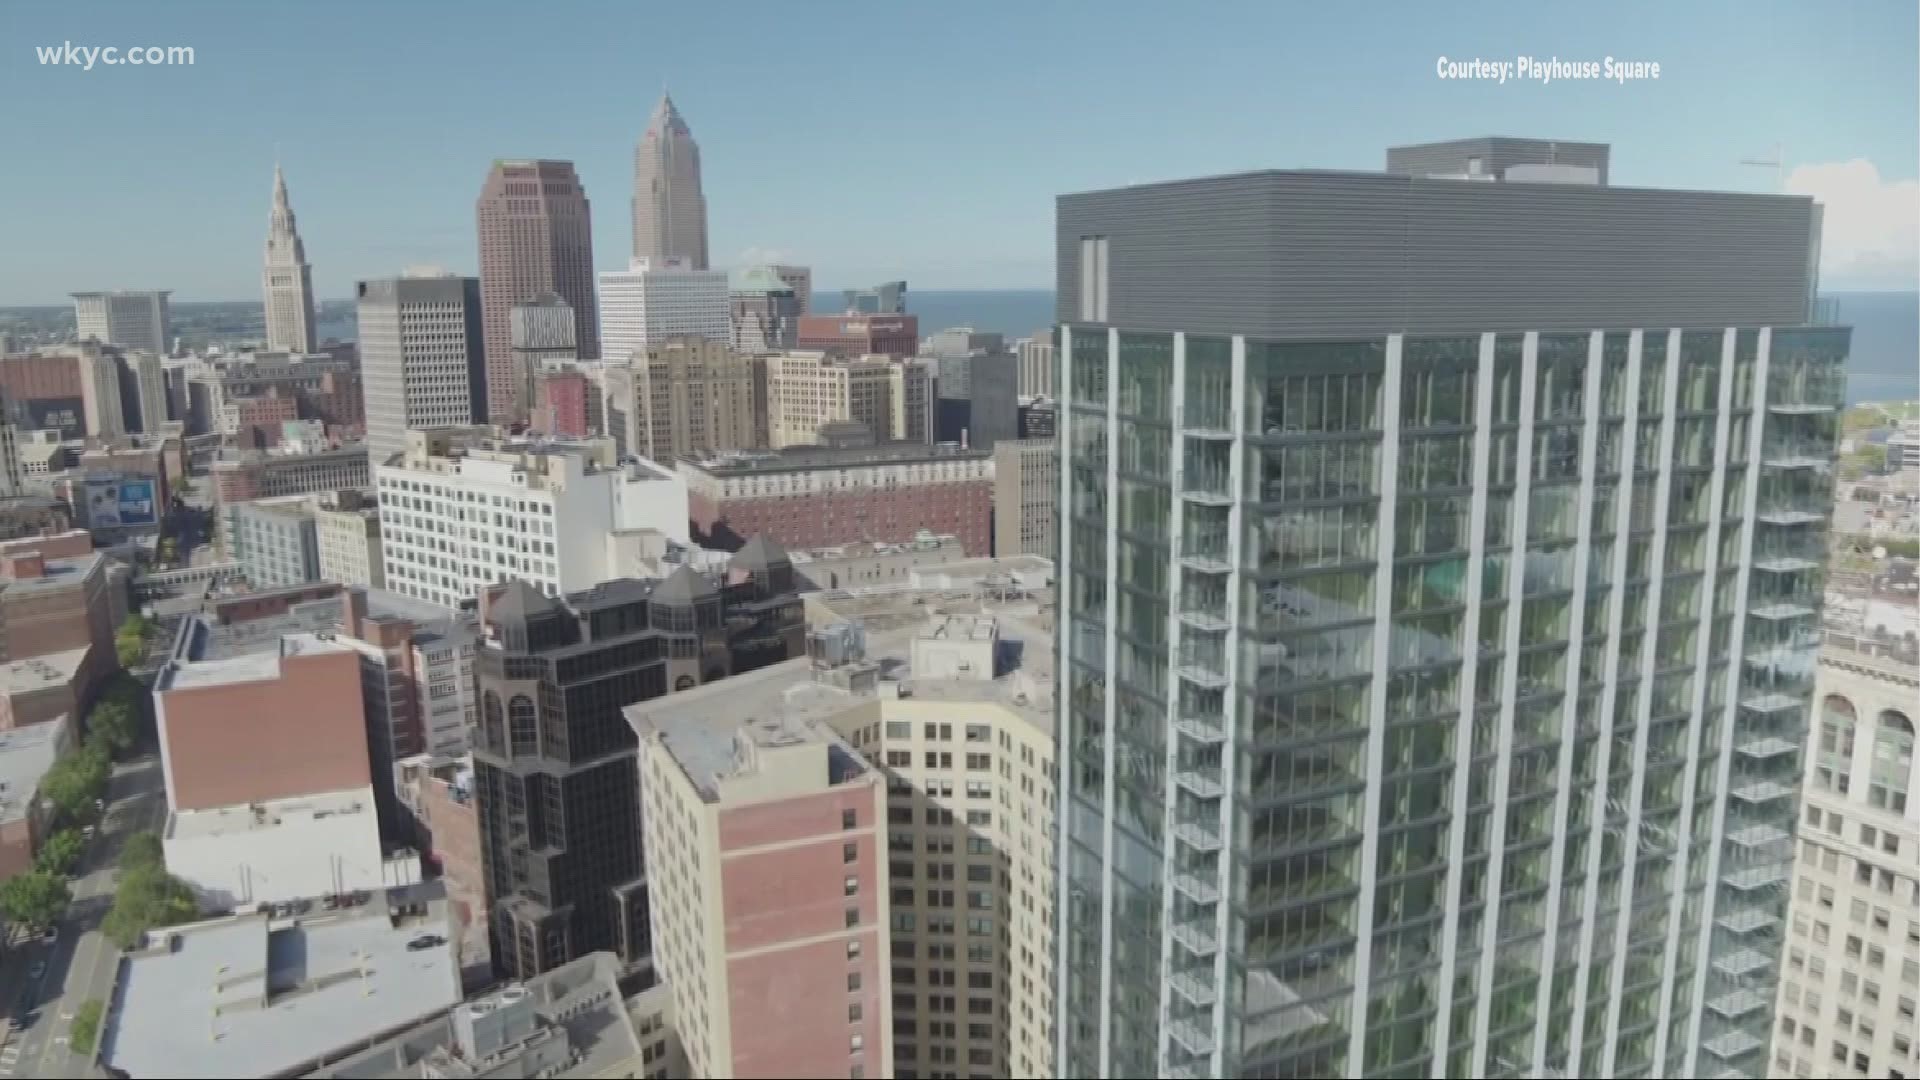 The Lumen is the largest residential development project in downtown Cleveland in 40 years. Will Ujek has a first look!